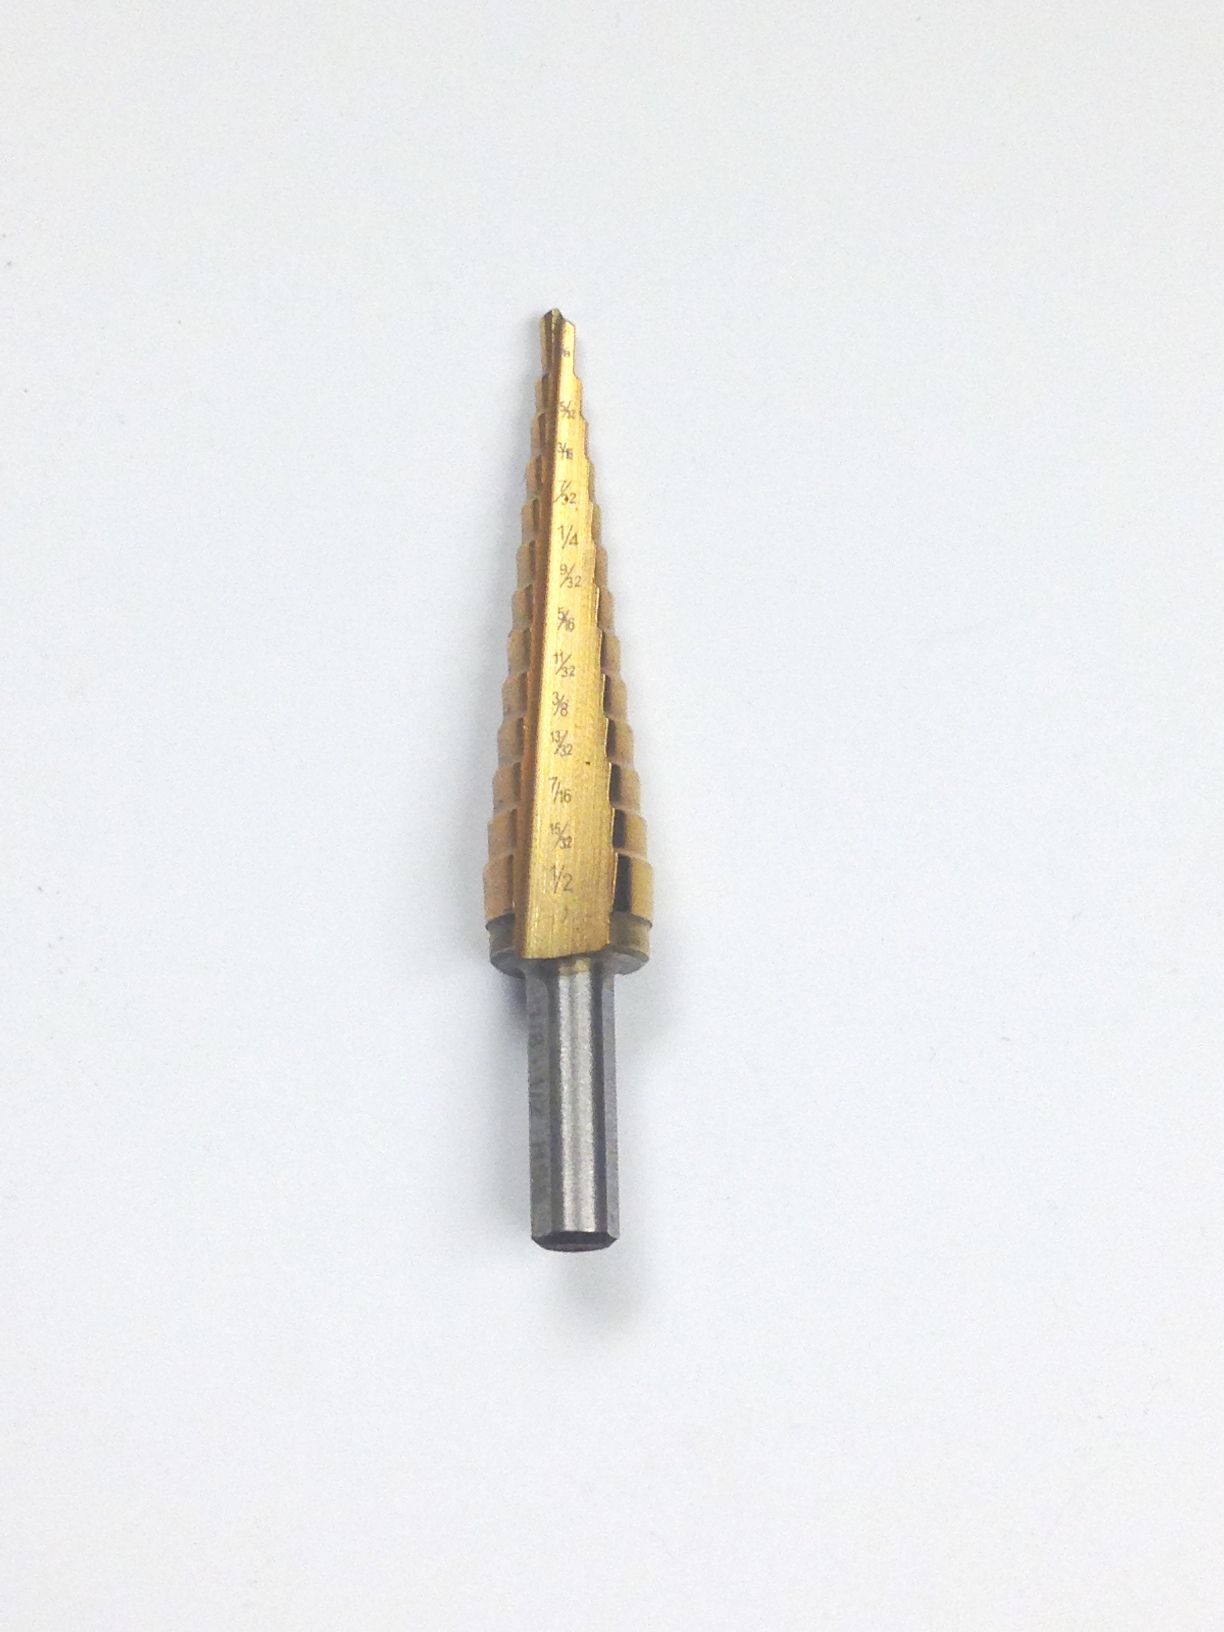 1/8-1/2" TiN COATED HIGH SPEED STEEL STEP DRILL WITH 13 STEPS (5000-0013)